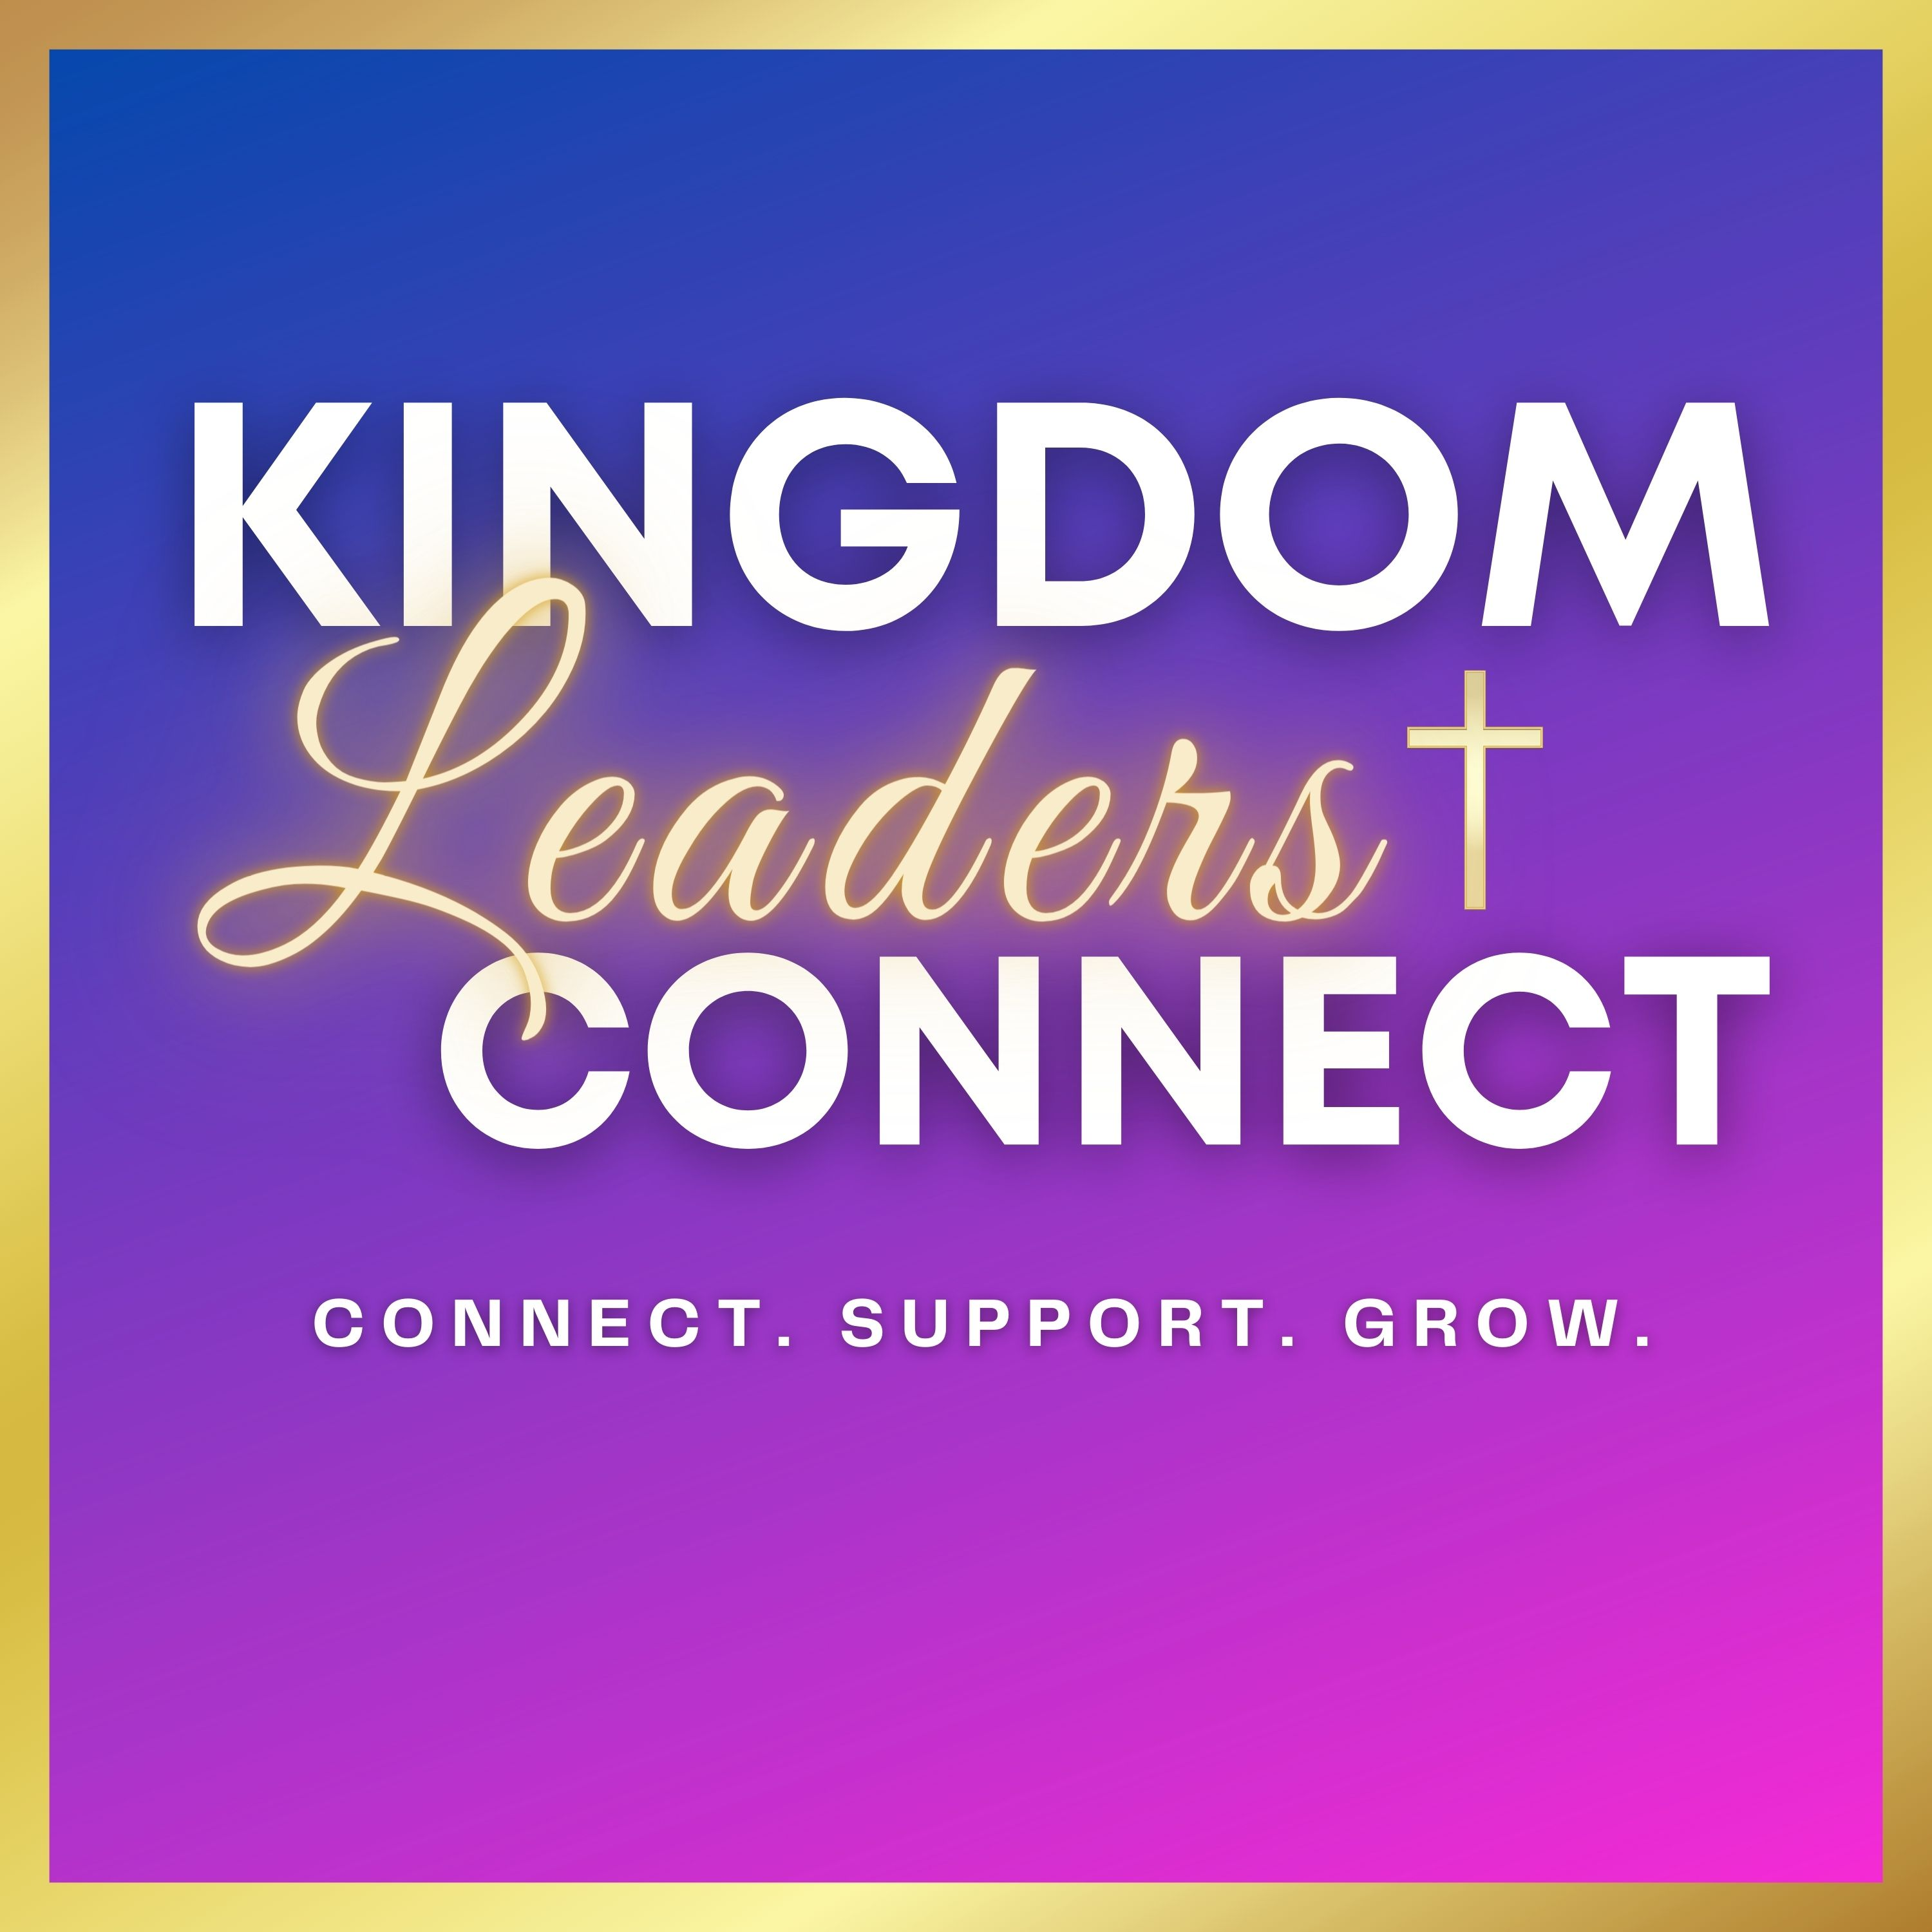 Kingdom Leaders Connect